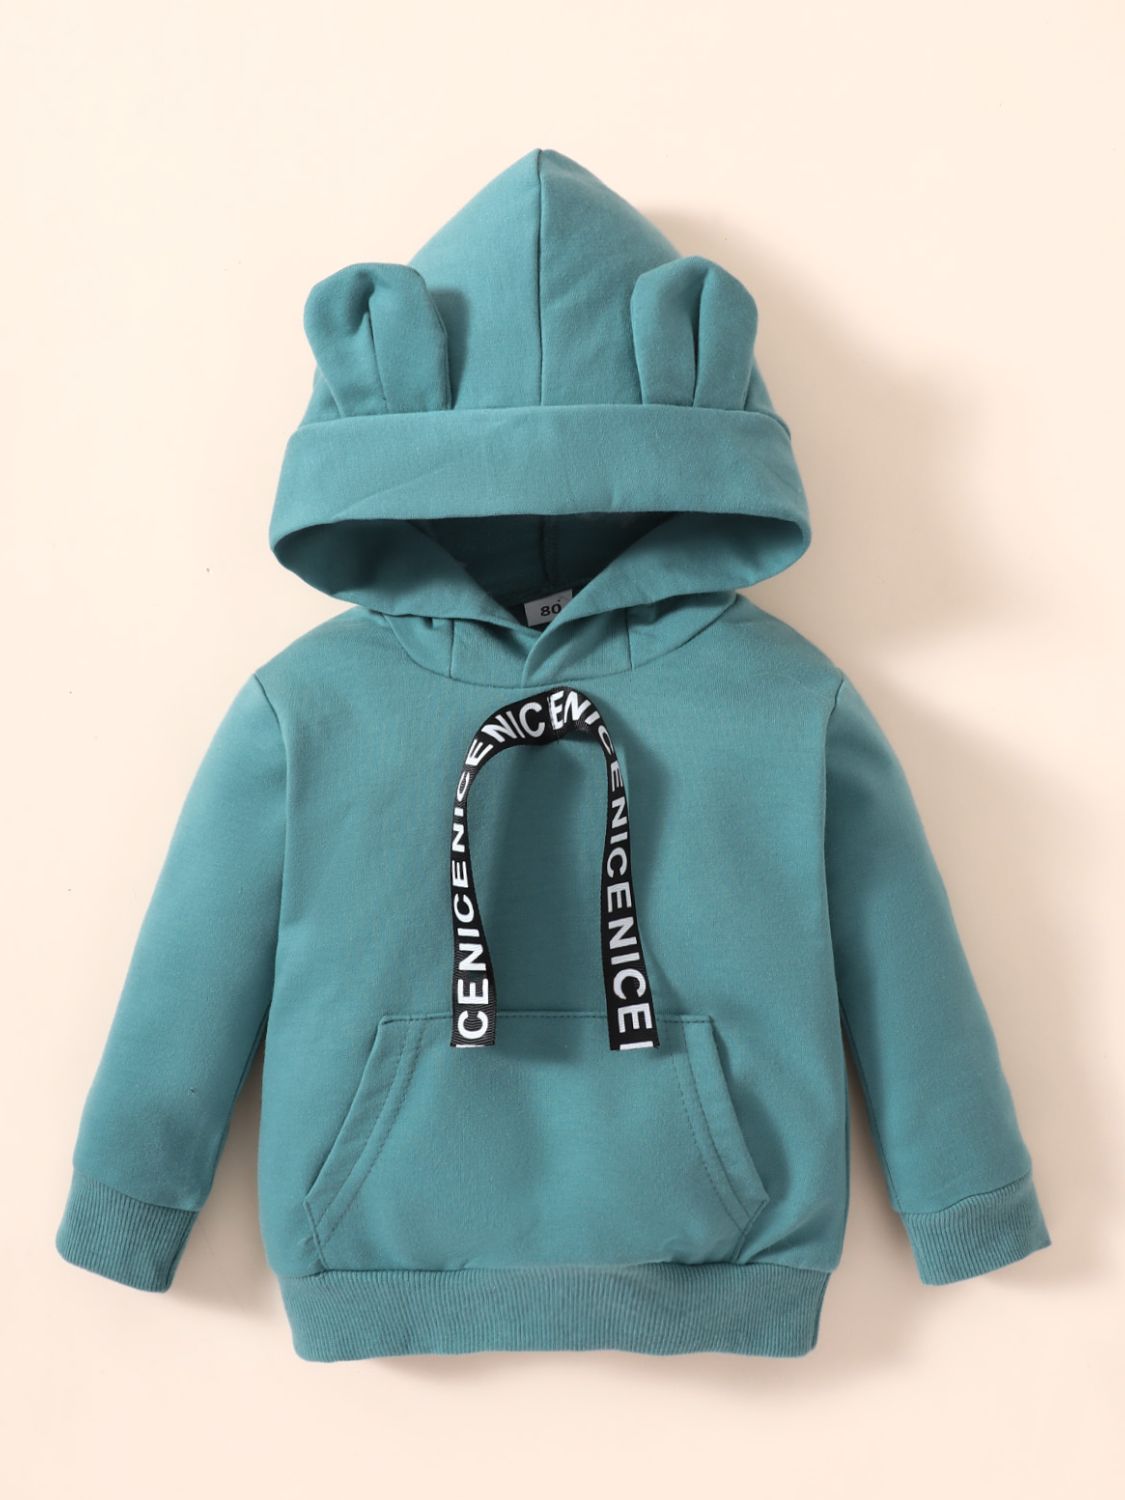 Kids Long Sleeve Hoodie and Joggers Set, Sizes 12m - 4T